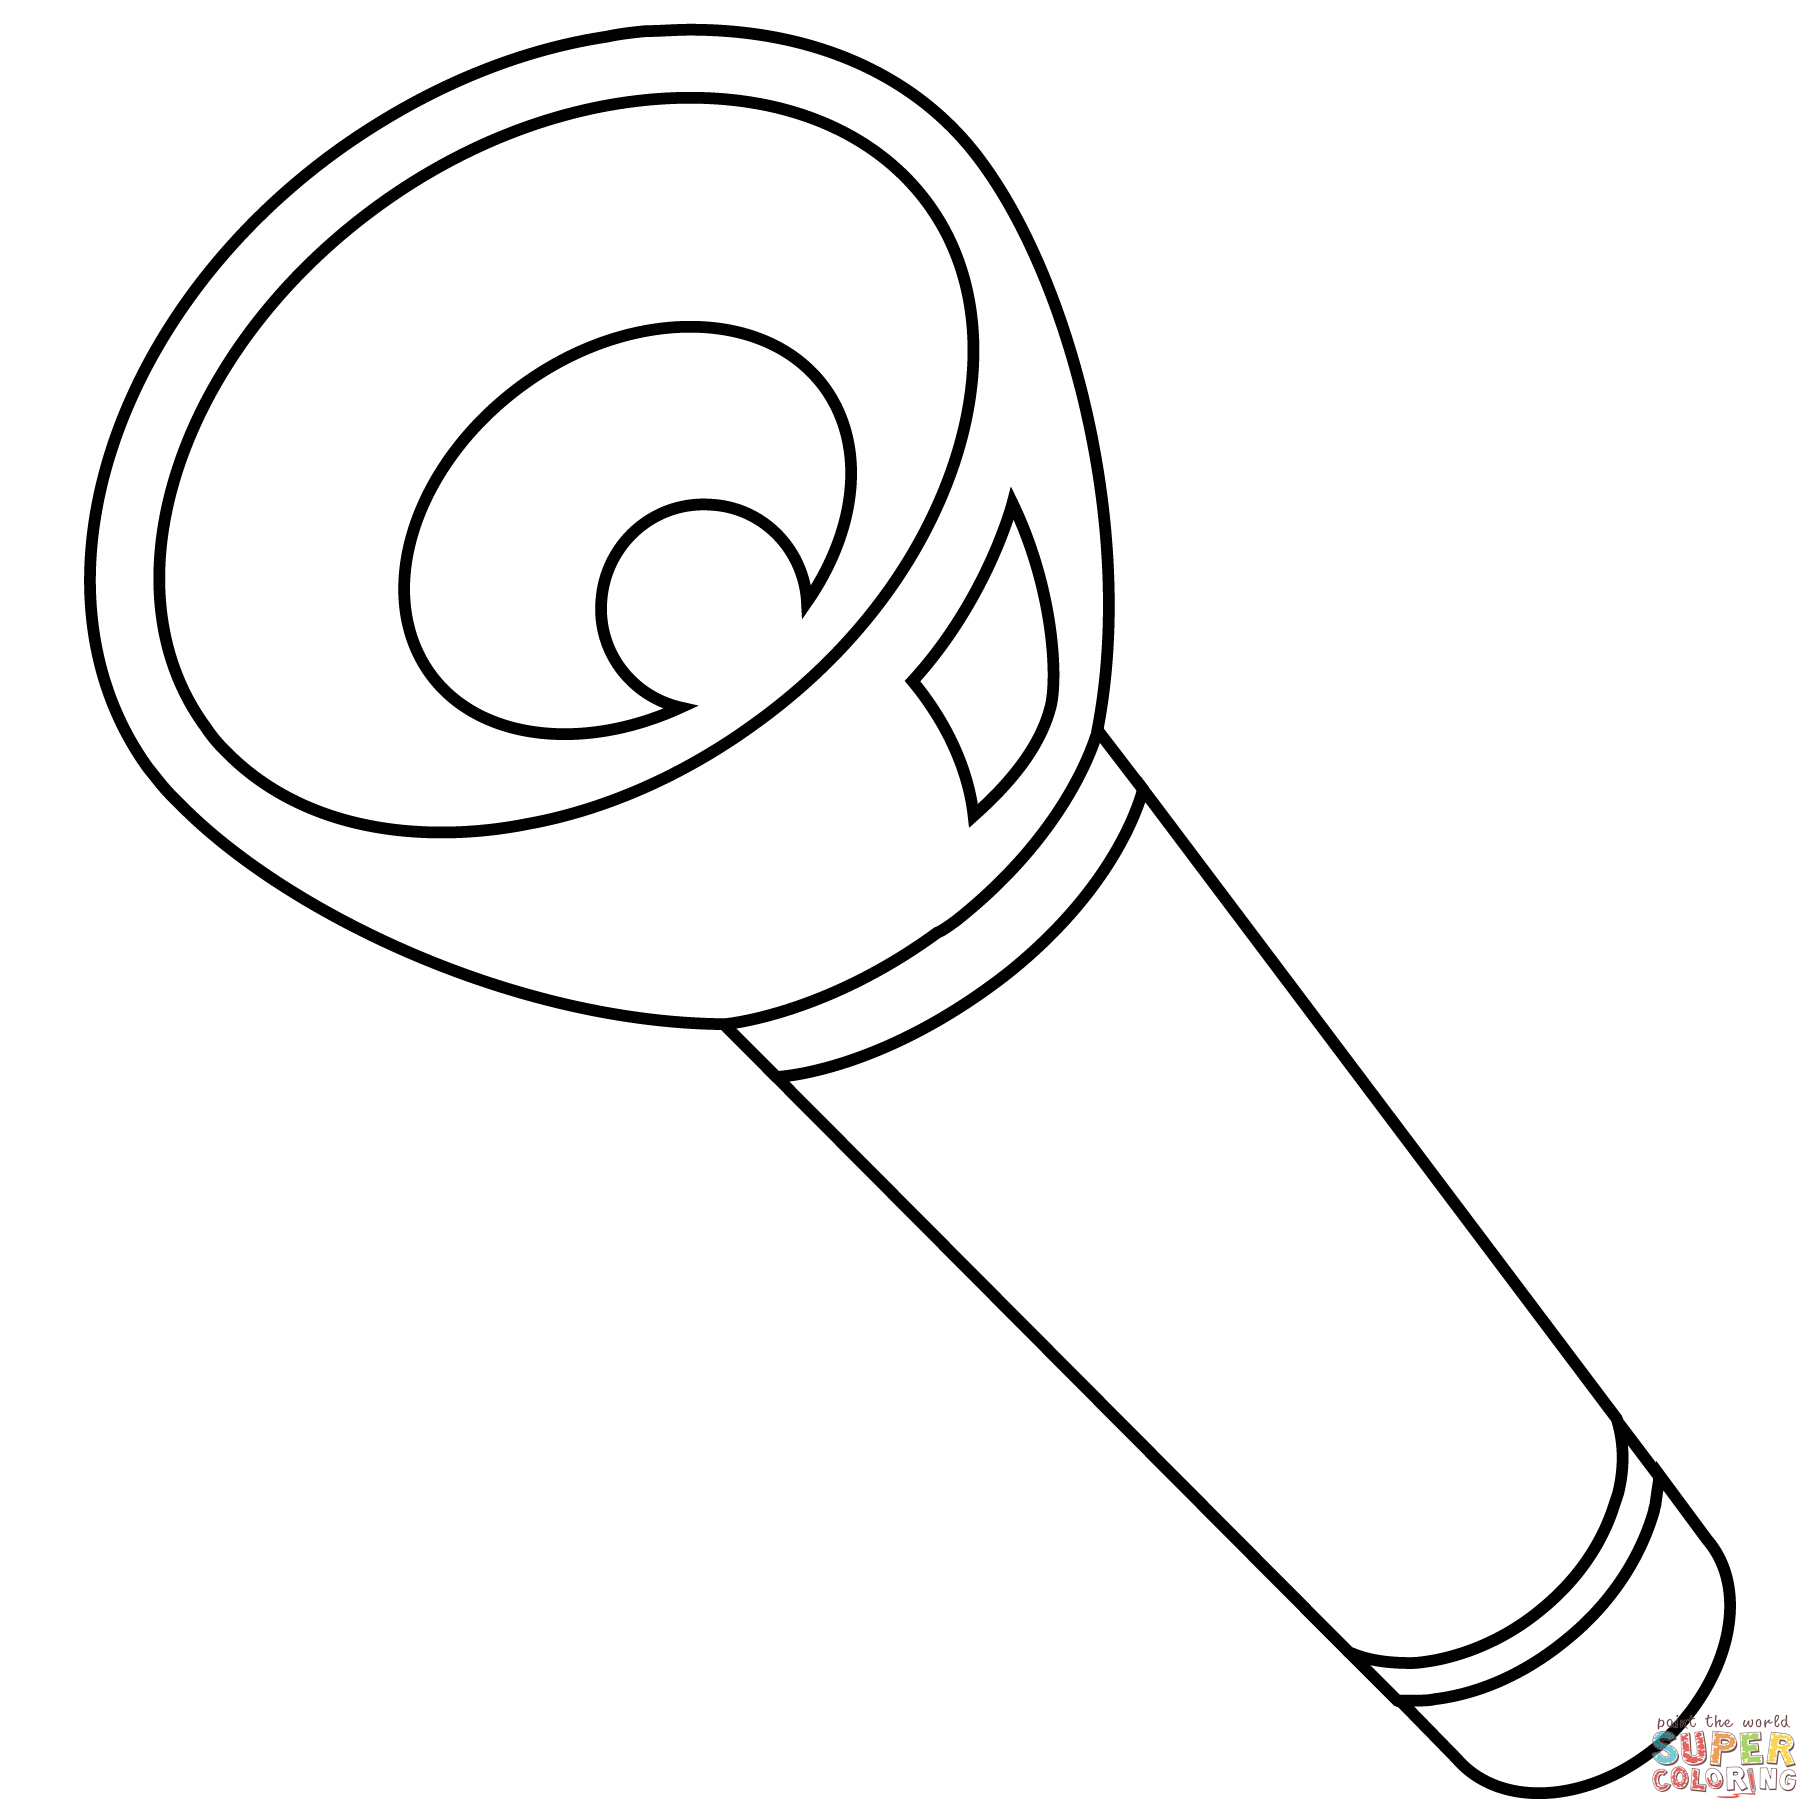 Flashlight emoji coloring page free printable coloring pages